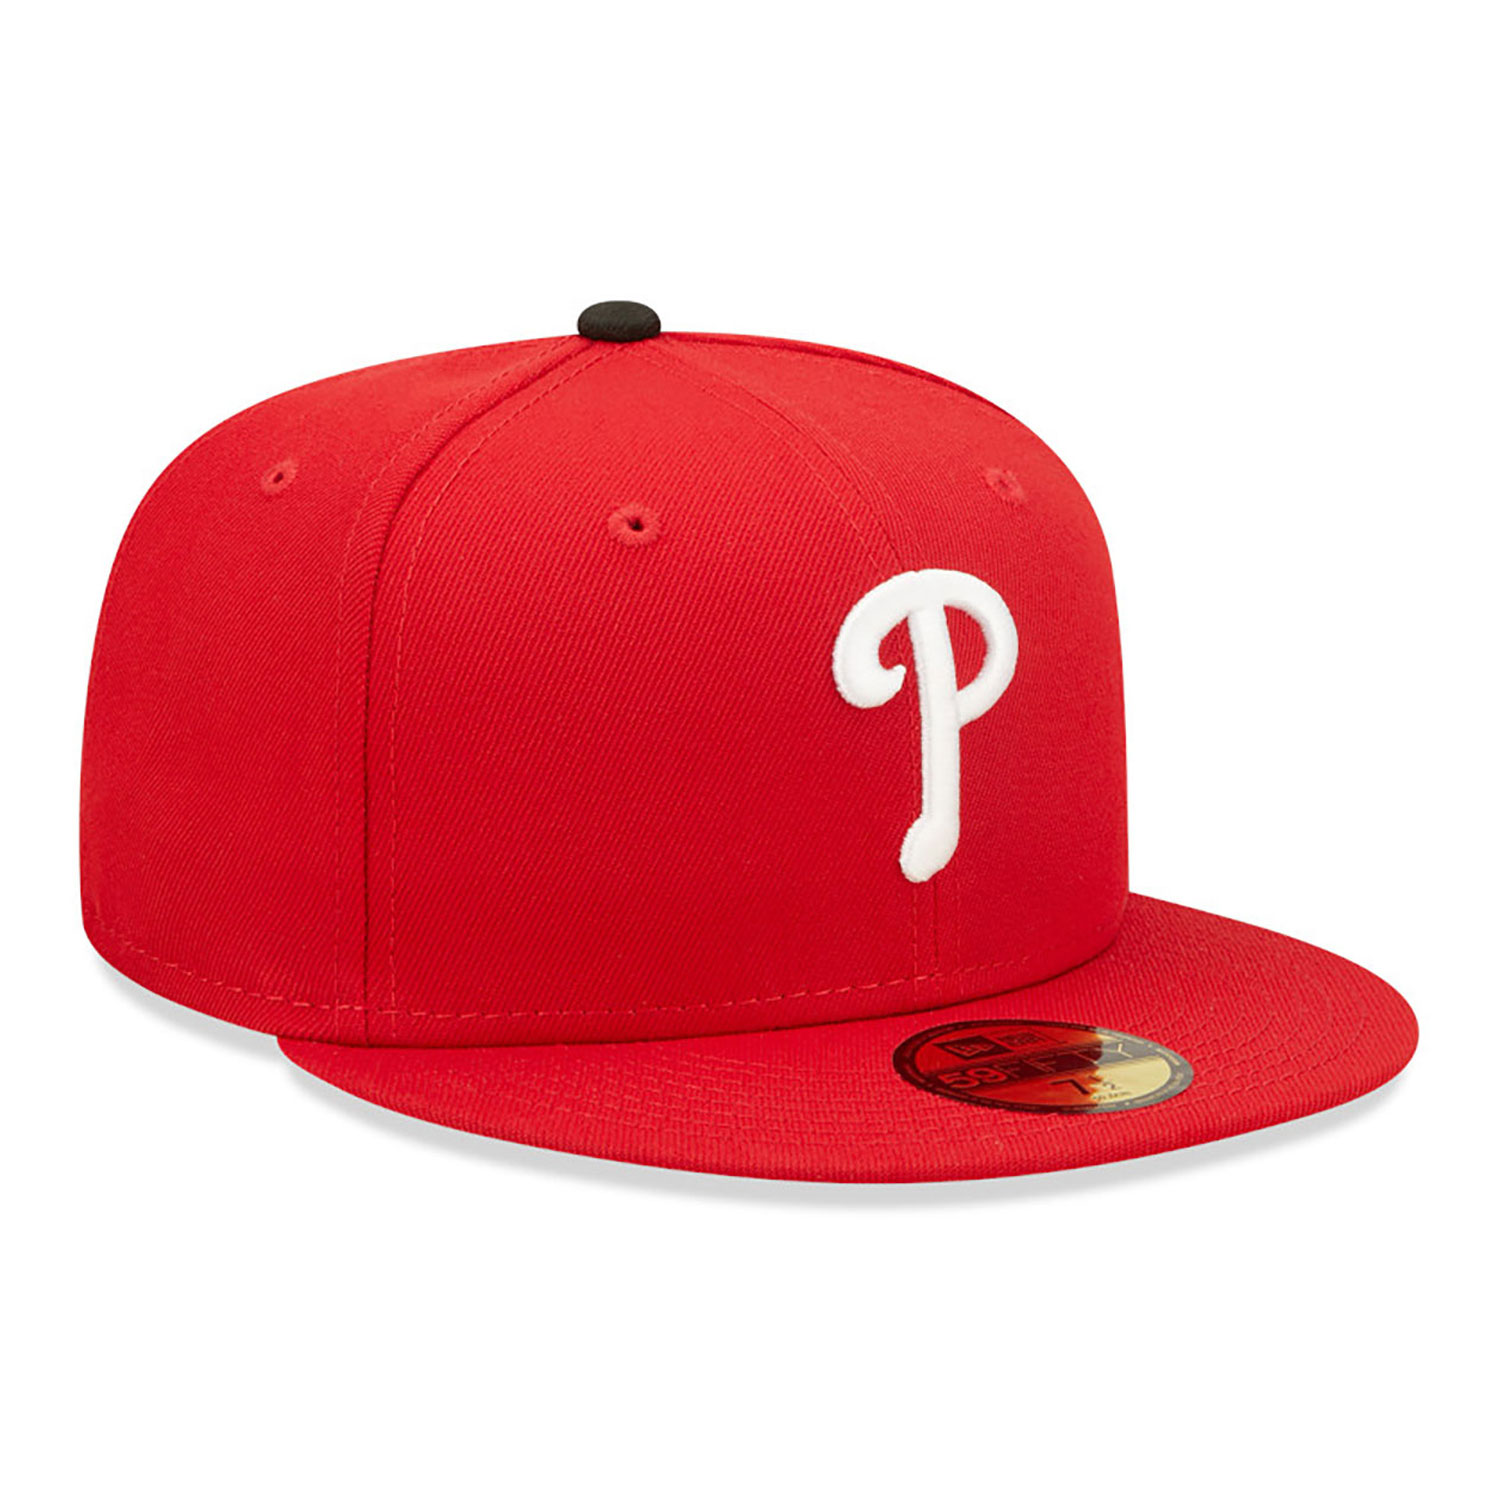 Philadelphia Phillies Authentic On Field Red 59FIFTY Berretto